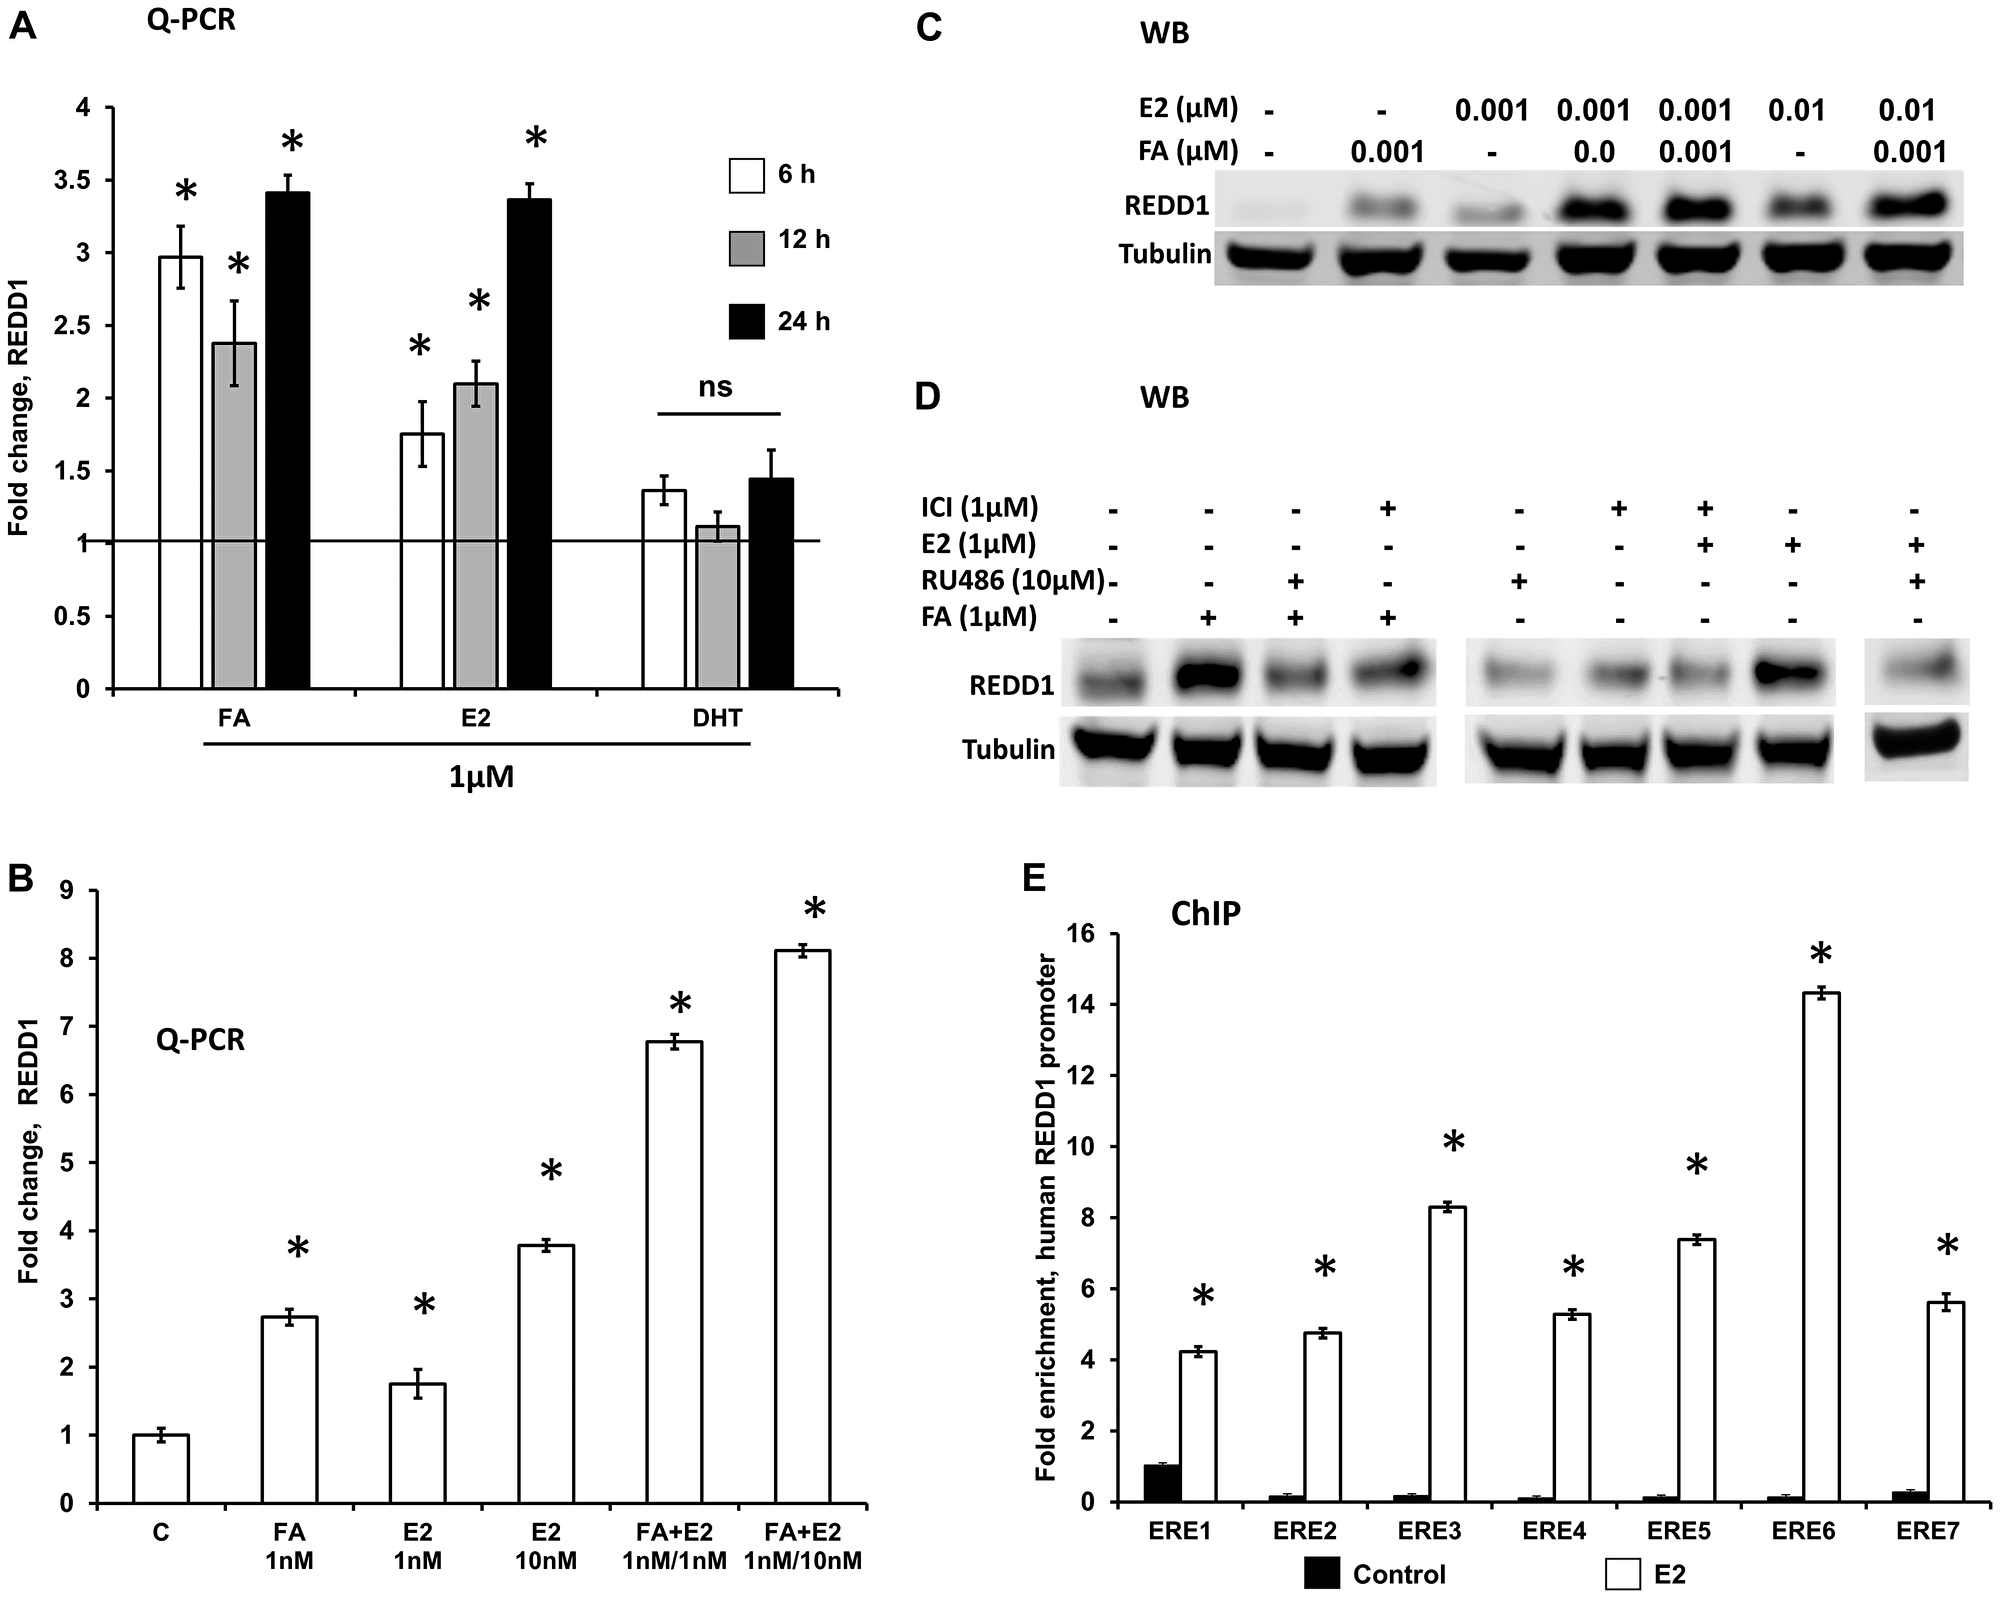 REDD1 expression in keratinocytes is co-regulated by glucocorticoids and estrogens.